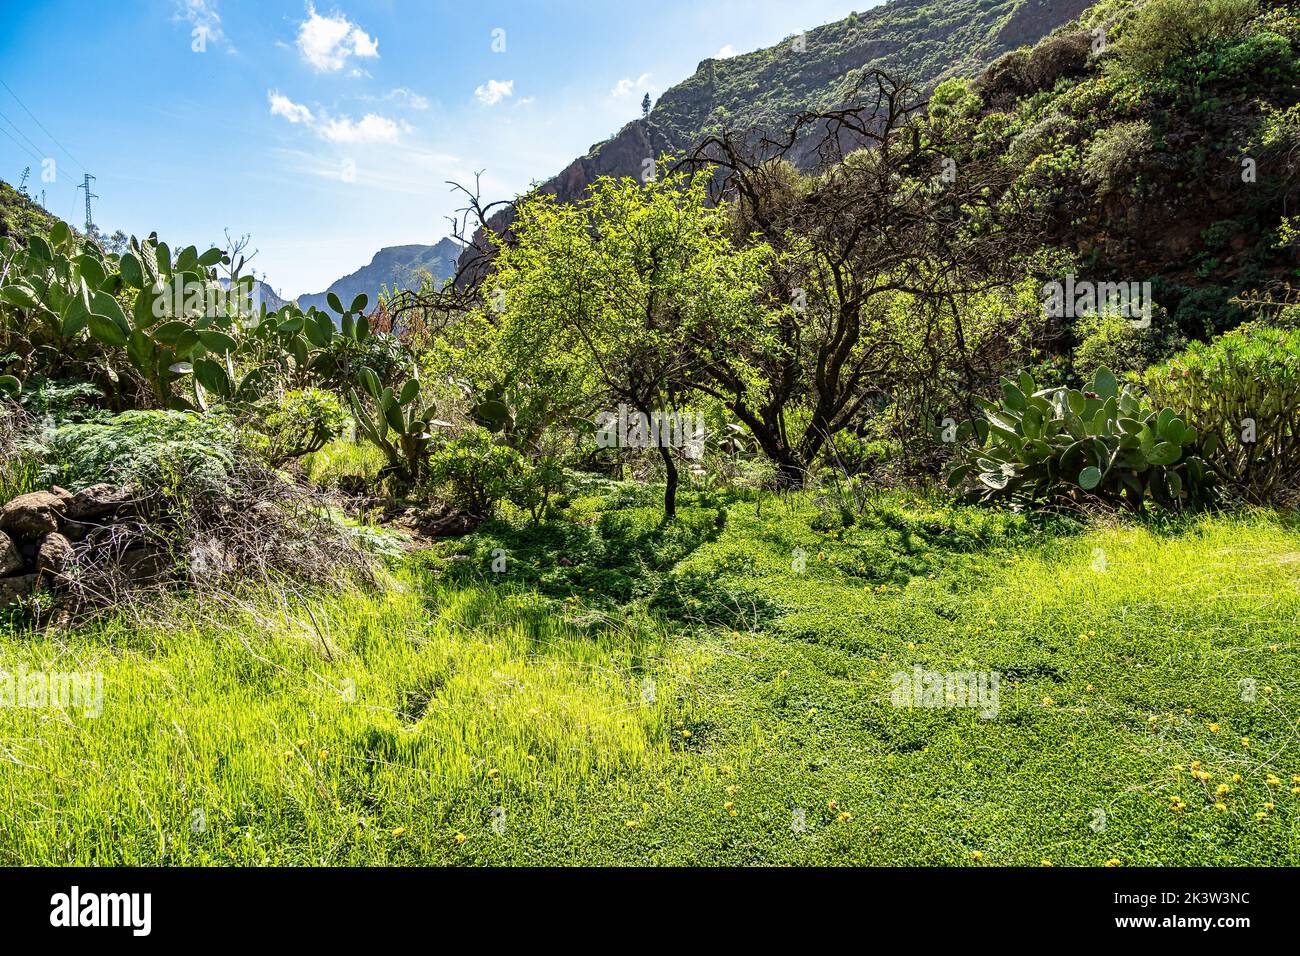 Hiking from Barranco de Guayadeque to Caldera de los Marteles, a volcanic area with dry fields at the bottom, Gran Canaria, Canary Island, Spain, Euro Stock Photo